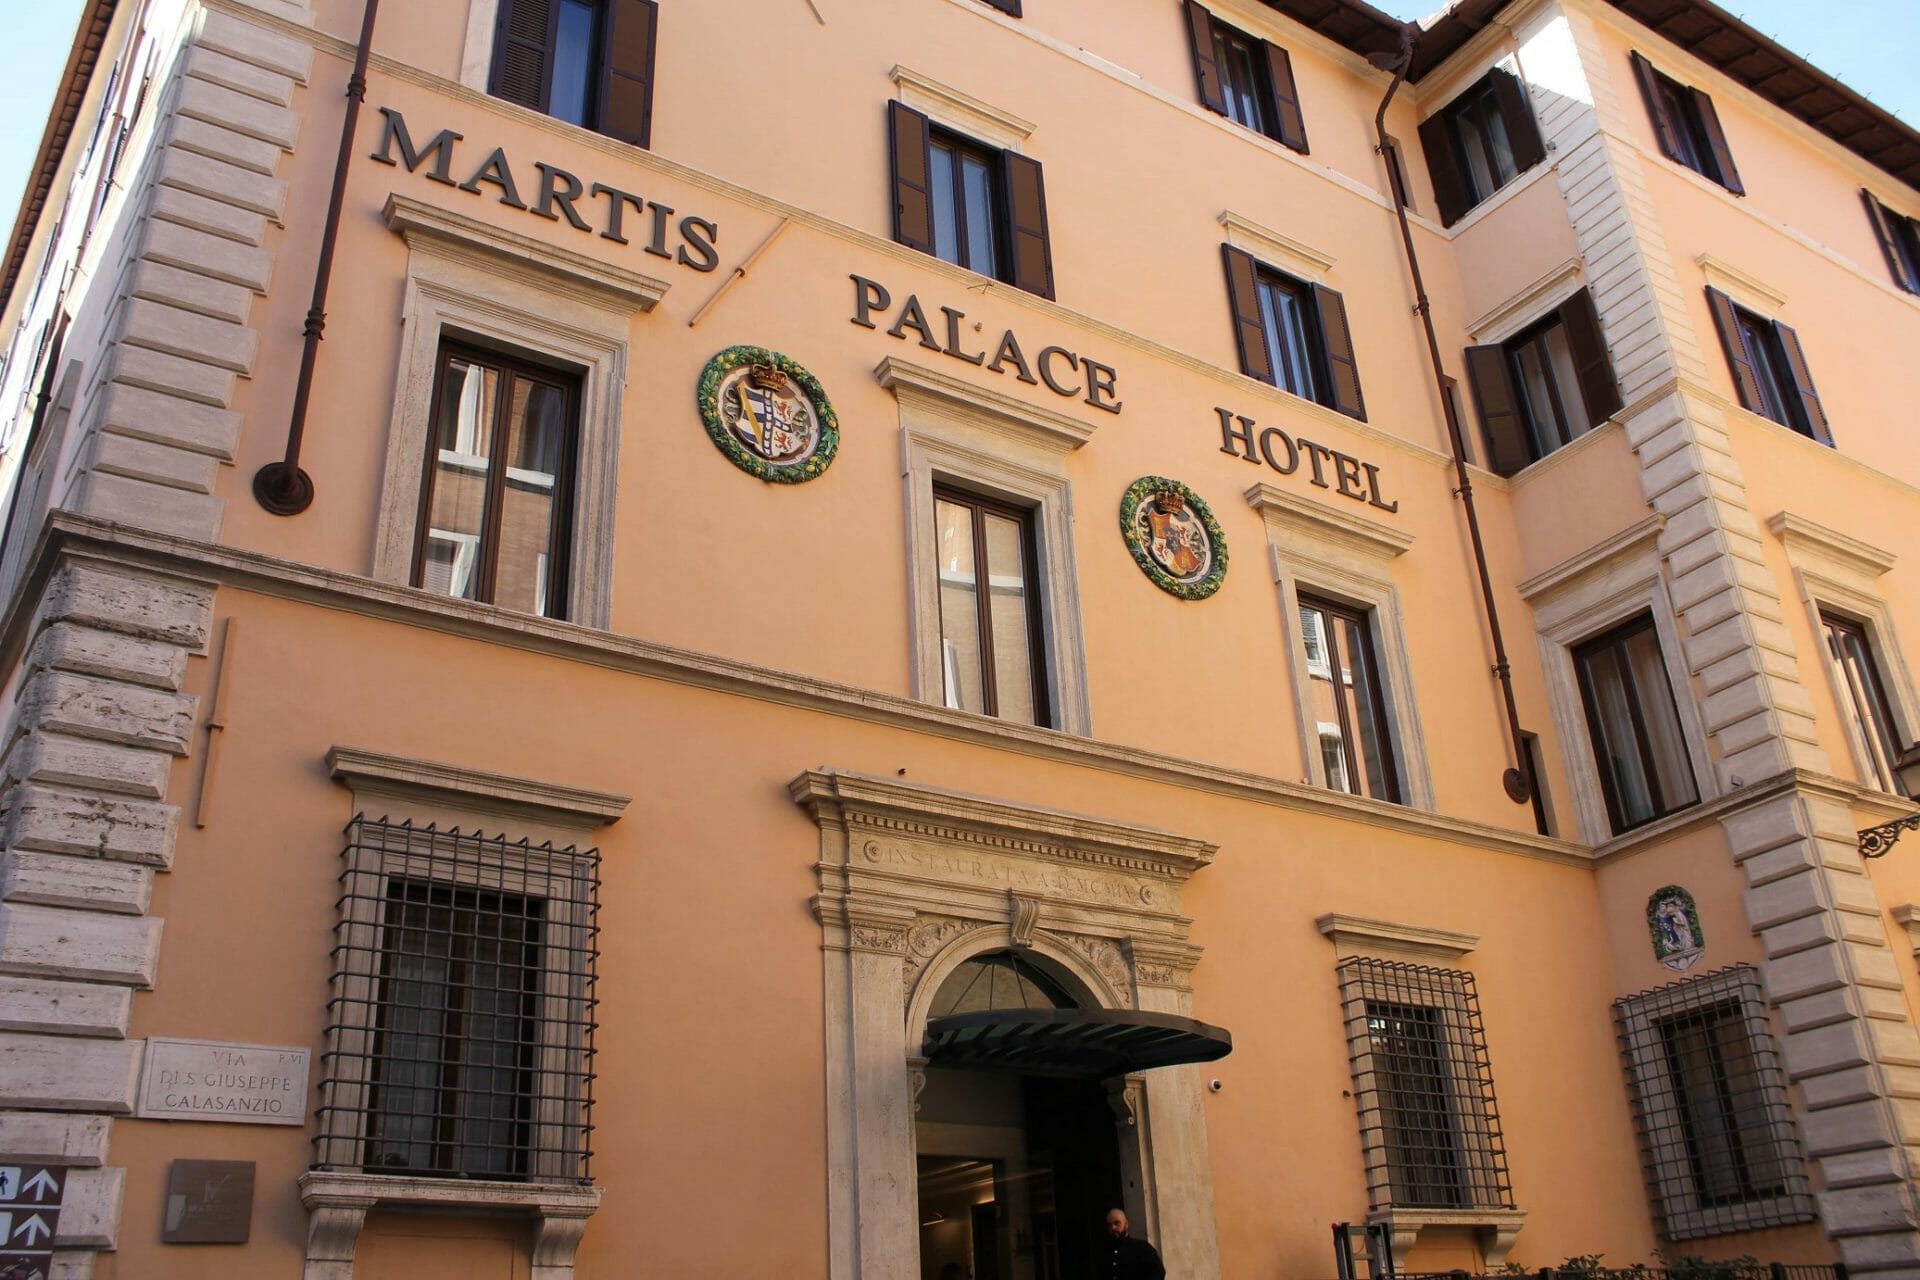 where to Stay in Rome Martis hotel